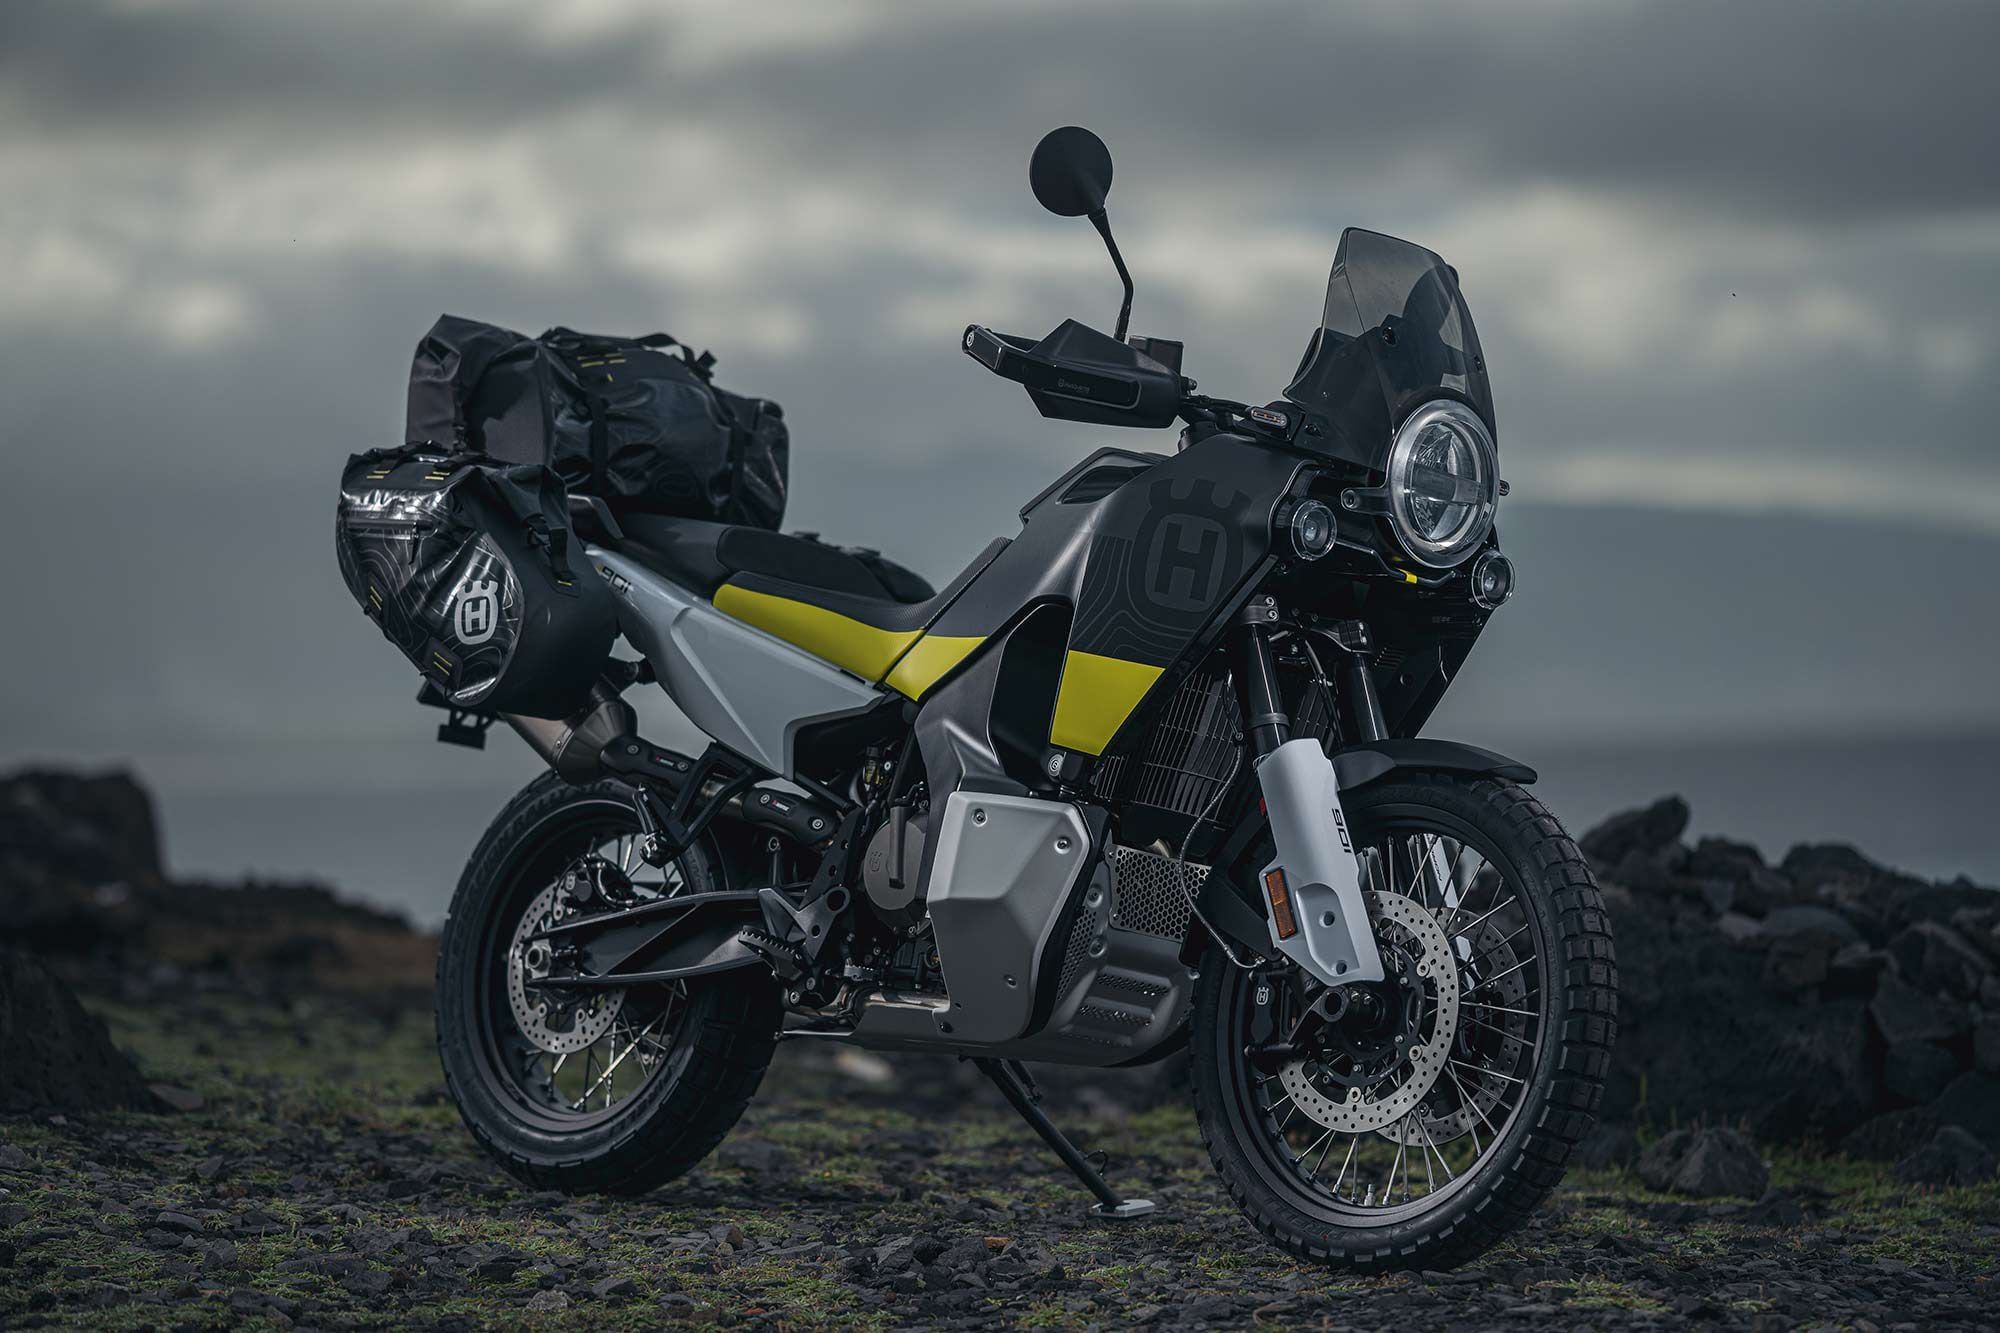 Individual styling, very similar to the prototype first unveiled at EICMA in 2019, allows the Norden to stand out from the rest.